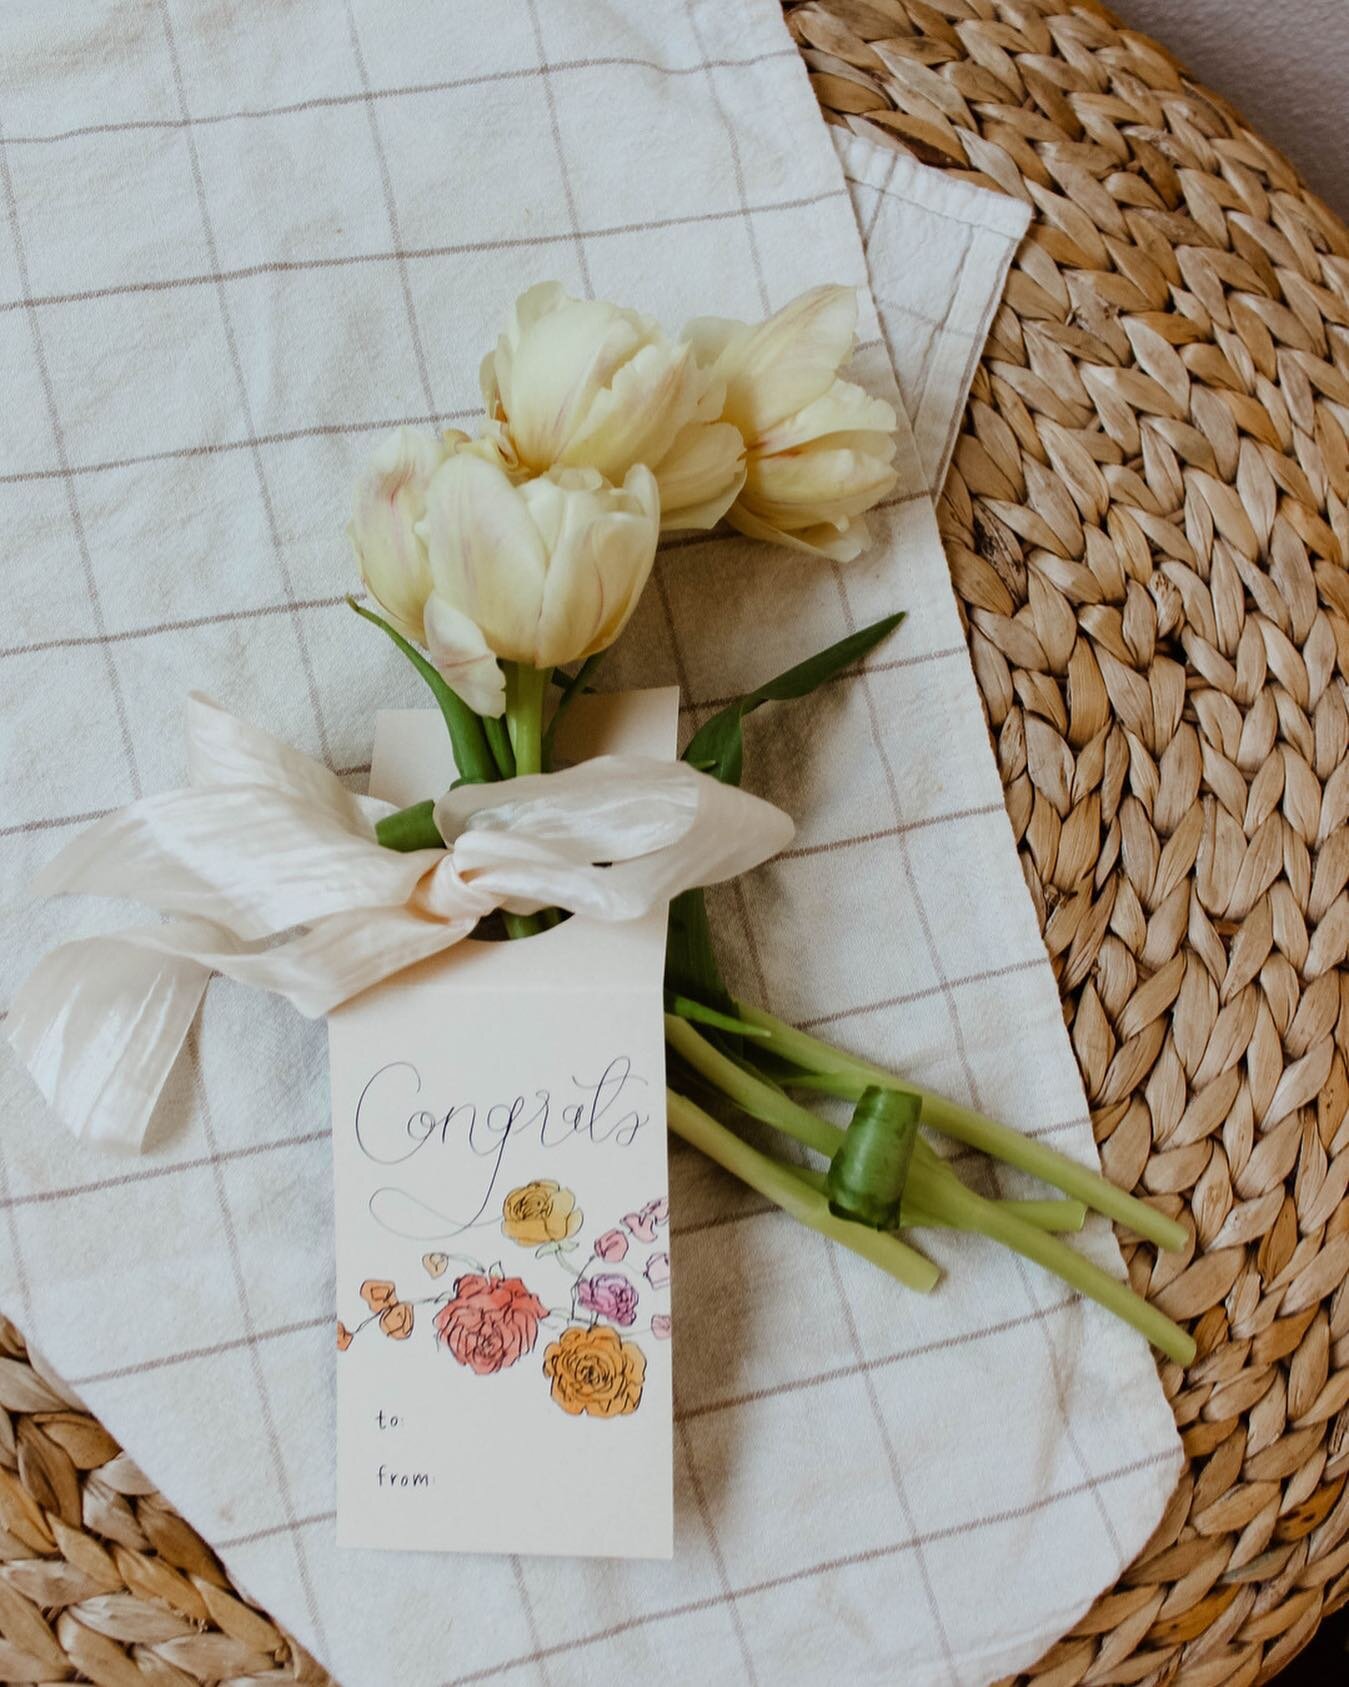 LOVING all the tulips everywhere right now! they make the perfect gift with our wine bottle tags! 
⠀⠀⠀⠀⠀⠀⠀⠀⠀
#gift